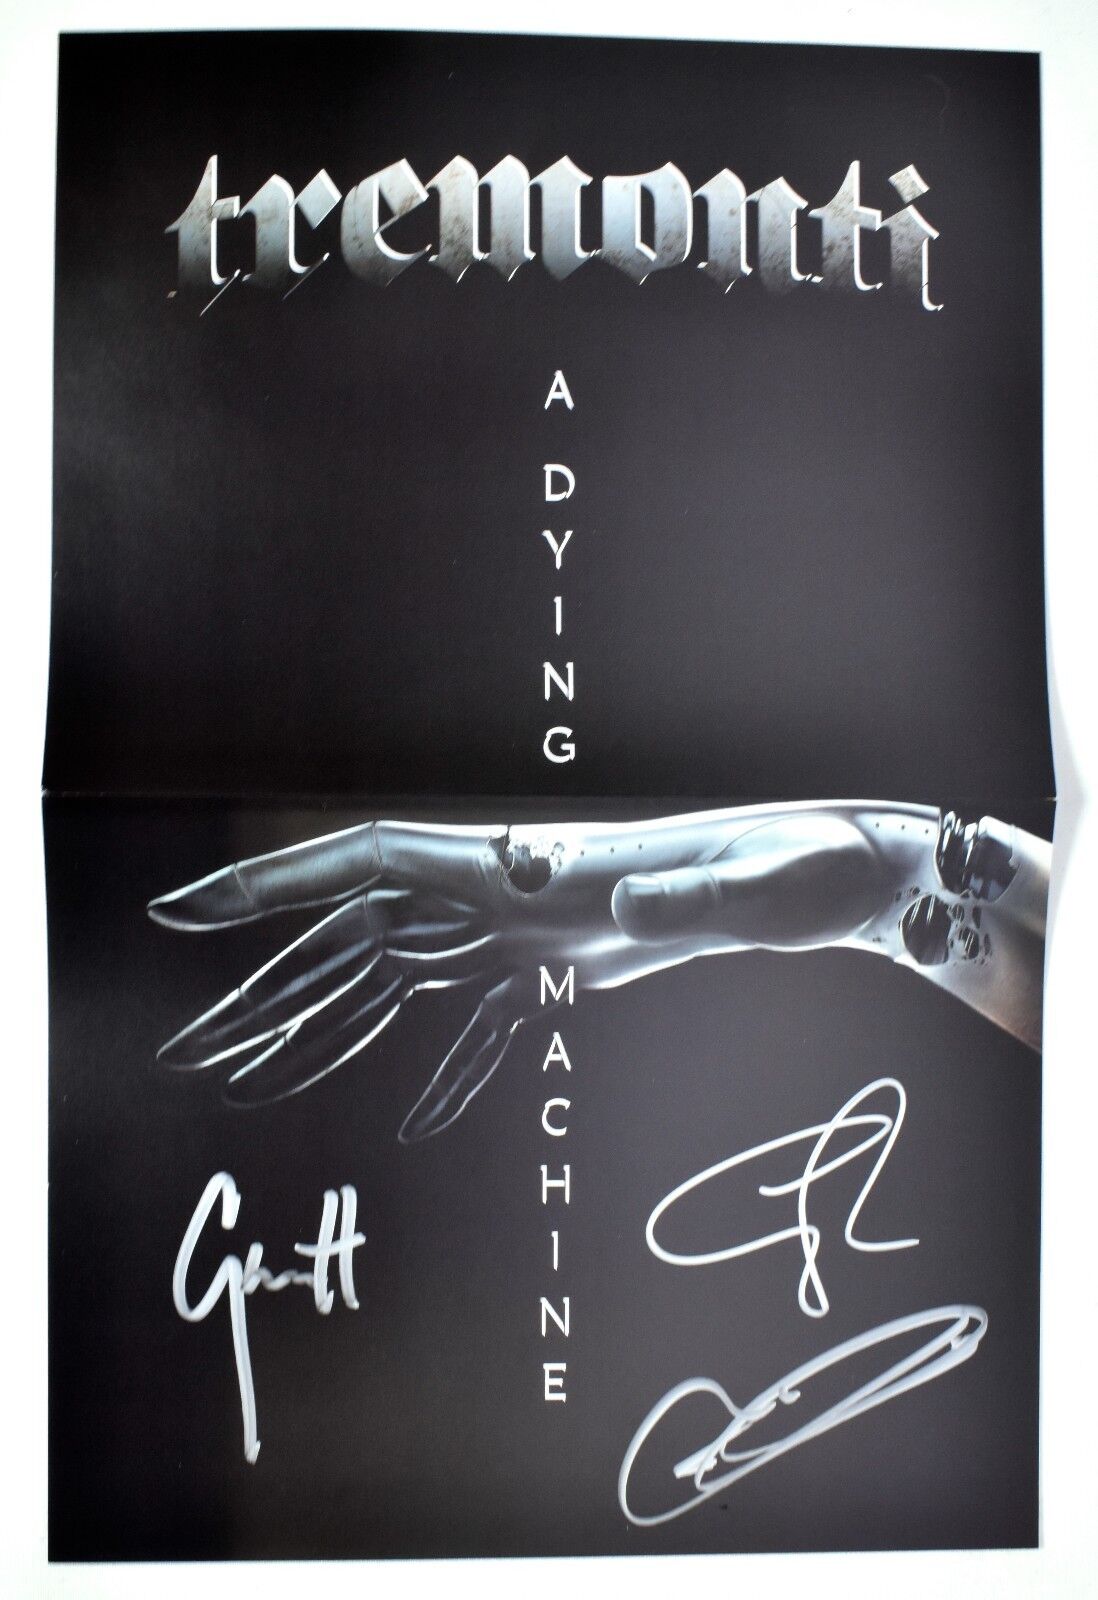 TREMONTI "A Dying Machine" Autographed / Signed Poster 11" x 17" >NEW< Без бренда